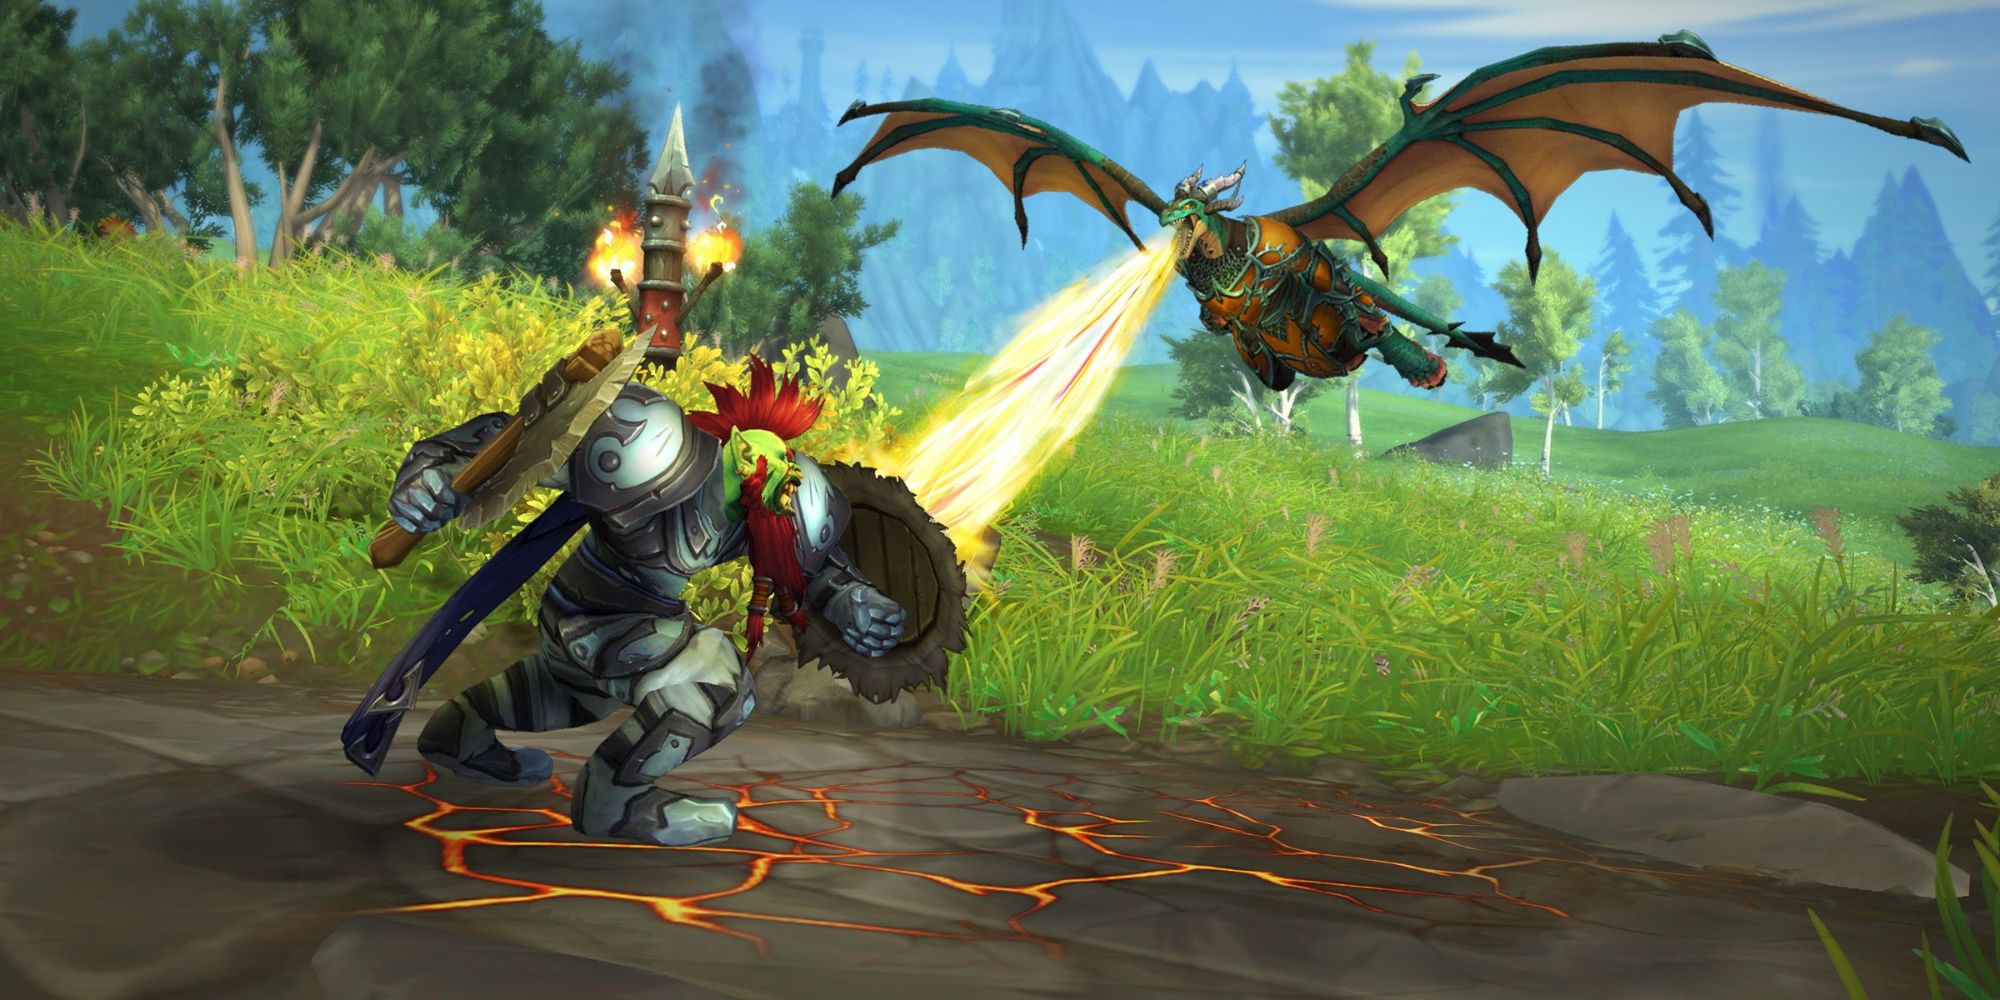 Two World of Warcraft characters doing battle in a field, with an Orc using a shield to deflect fire breathed by a flying Dracthyr.